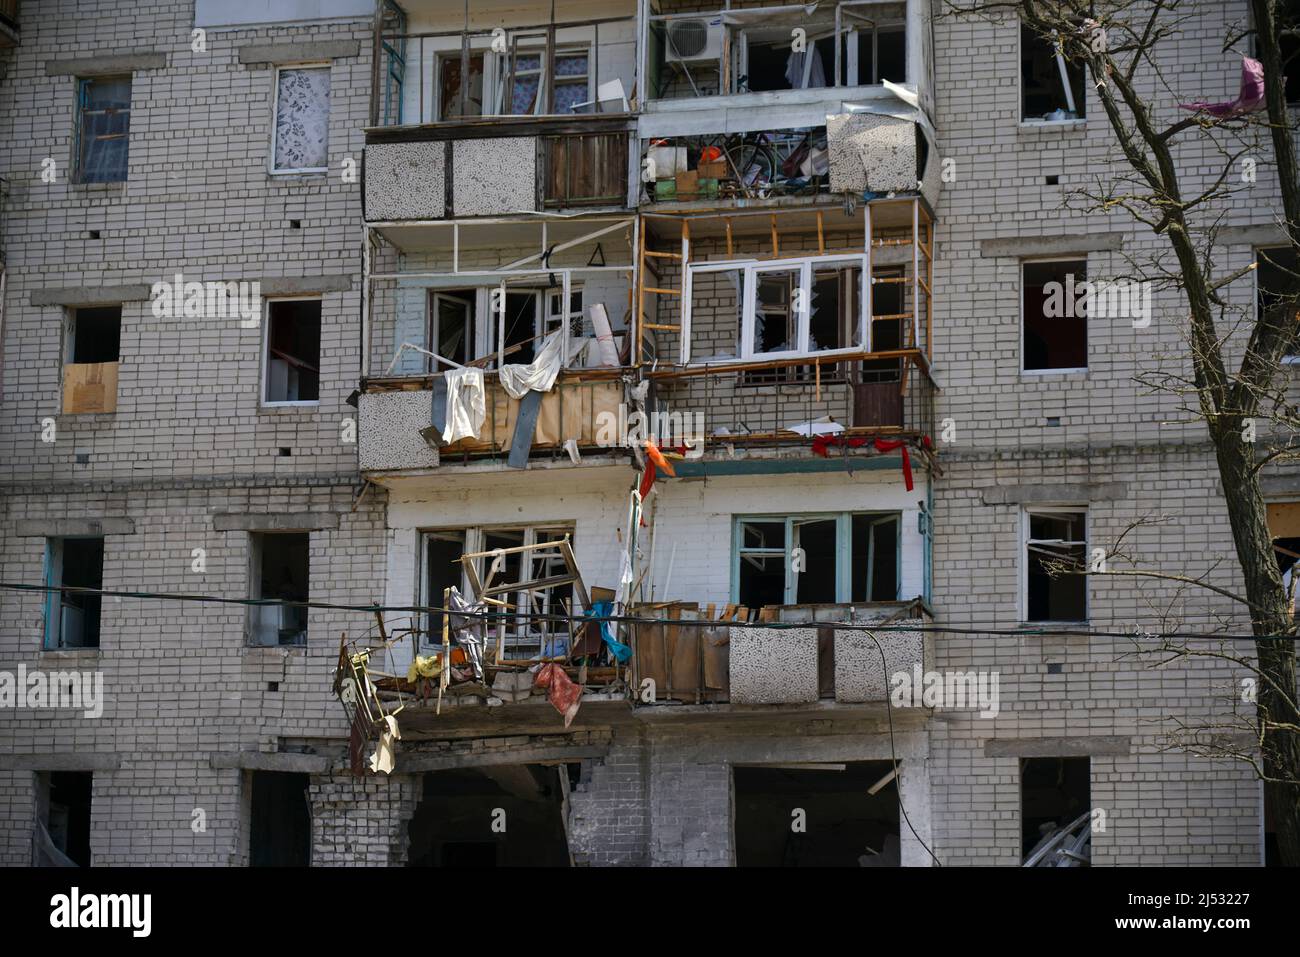 A destroyed residential building in the city that was damaged by a shell explosion during the war in Ukraine. House without windows. Stock Photo